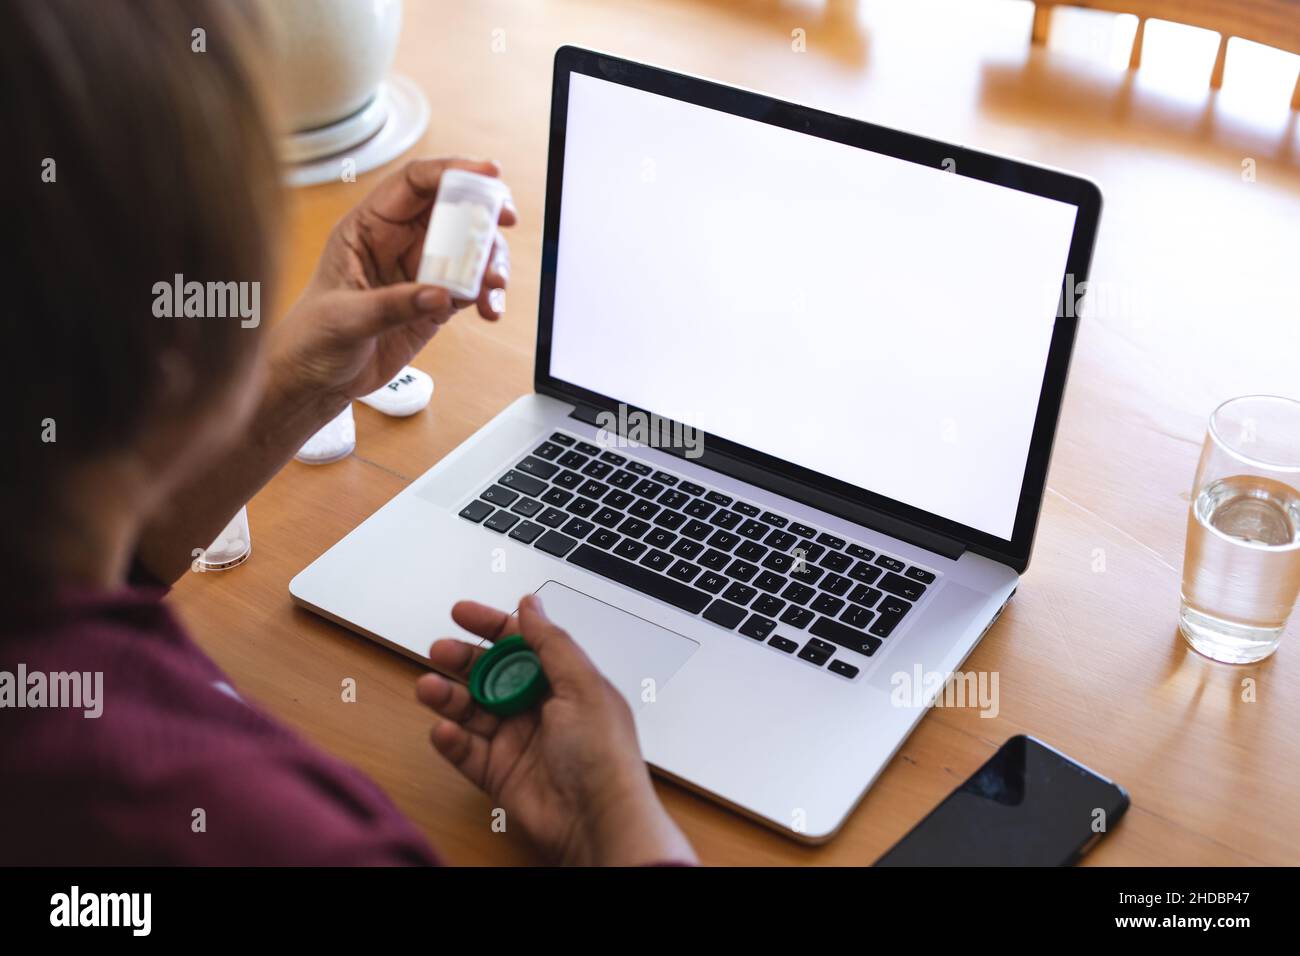 Senior woman with medicine using laptop during online doctor consultation at home, copy space Stock Photo